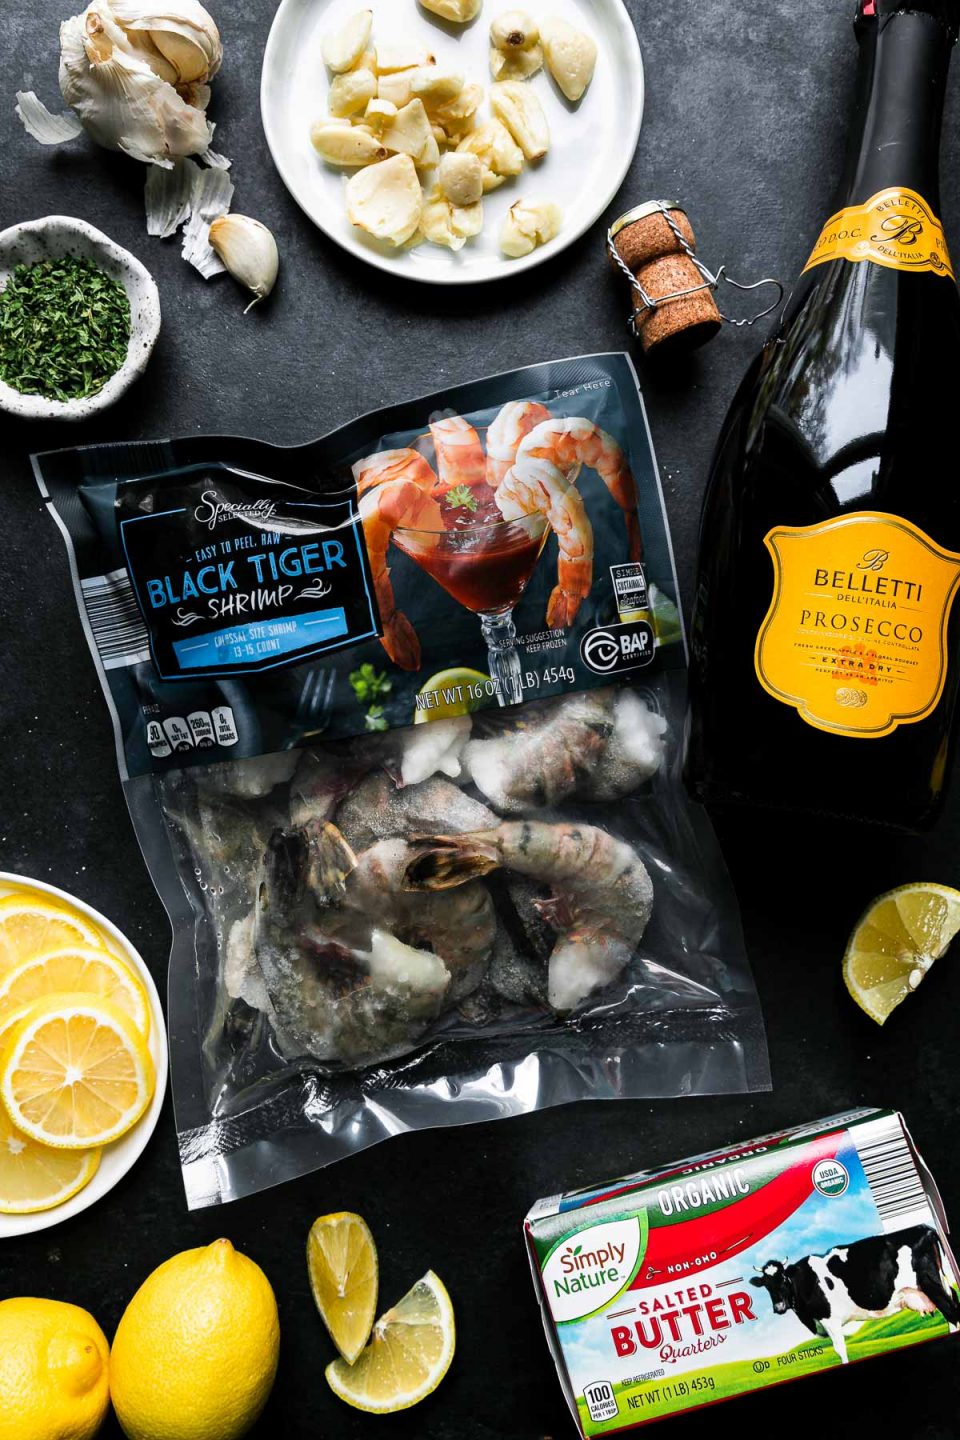 Prosecco Butter Poached Shrimp ingredients arranged on a black textured surface: Specially Selected Black Tiger Shrimp, Belletti Prosecco, Simply Nature Organic Salted Butter, lemon, garlic, Stonemill Parsley Flakes.